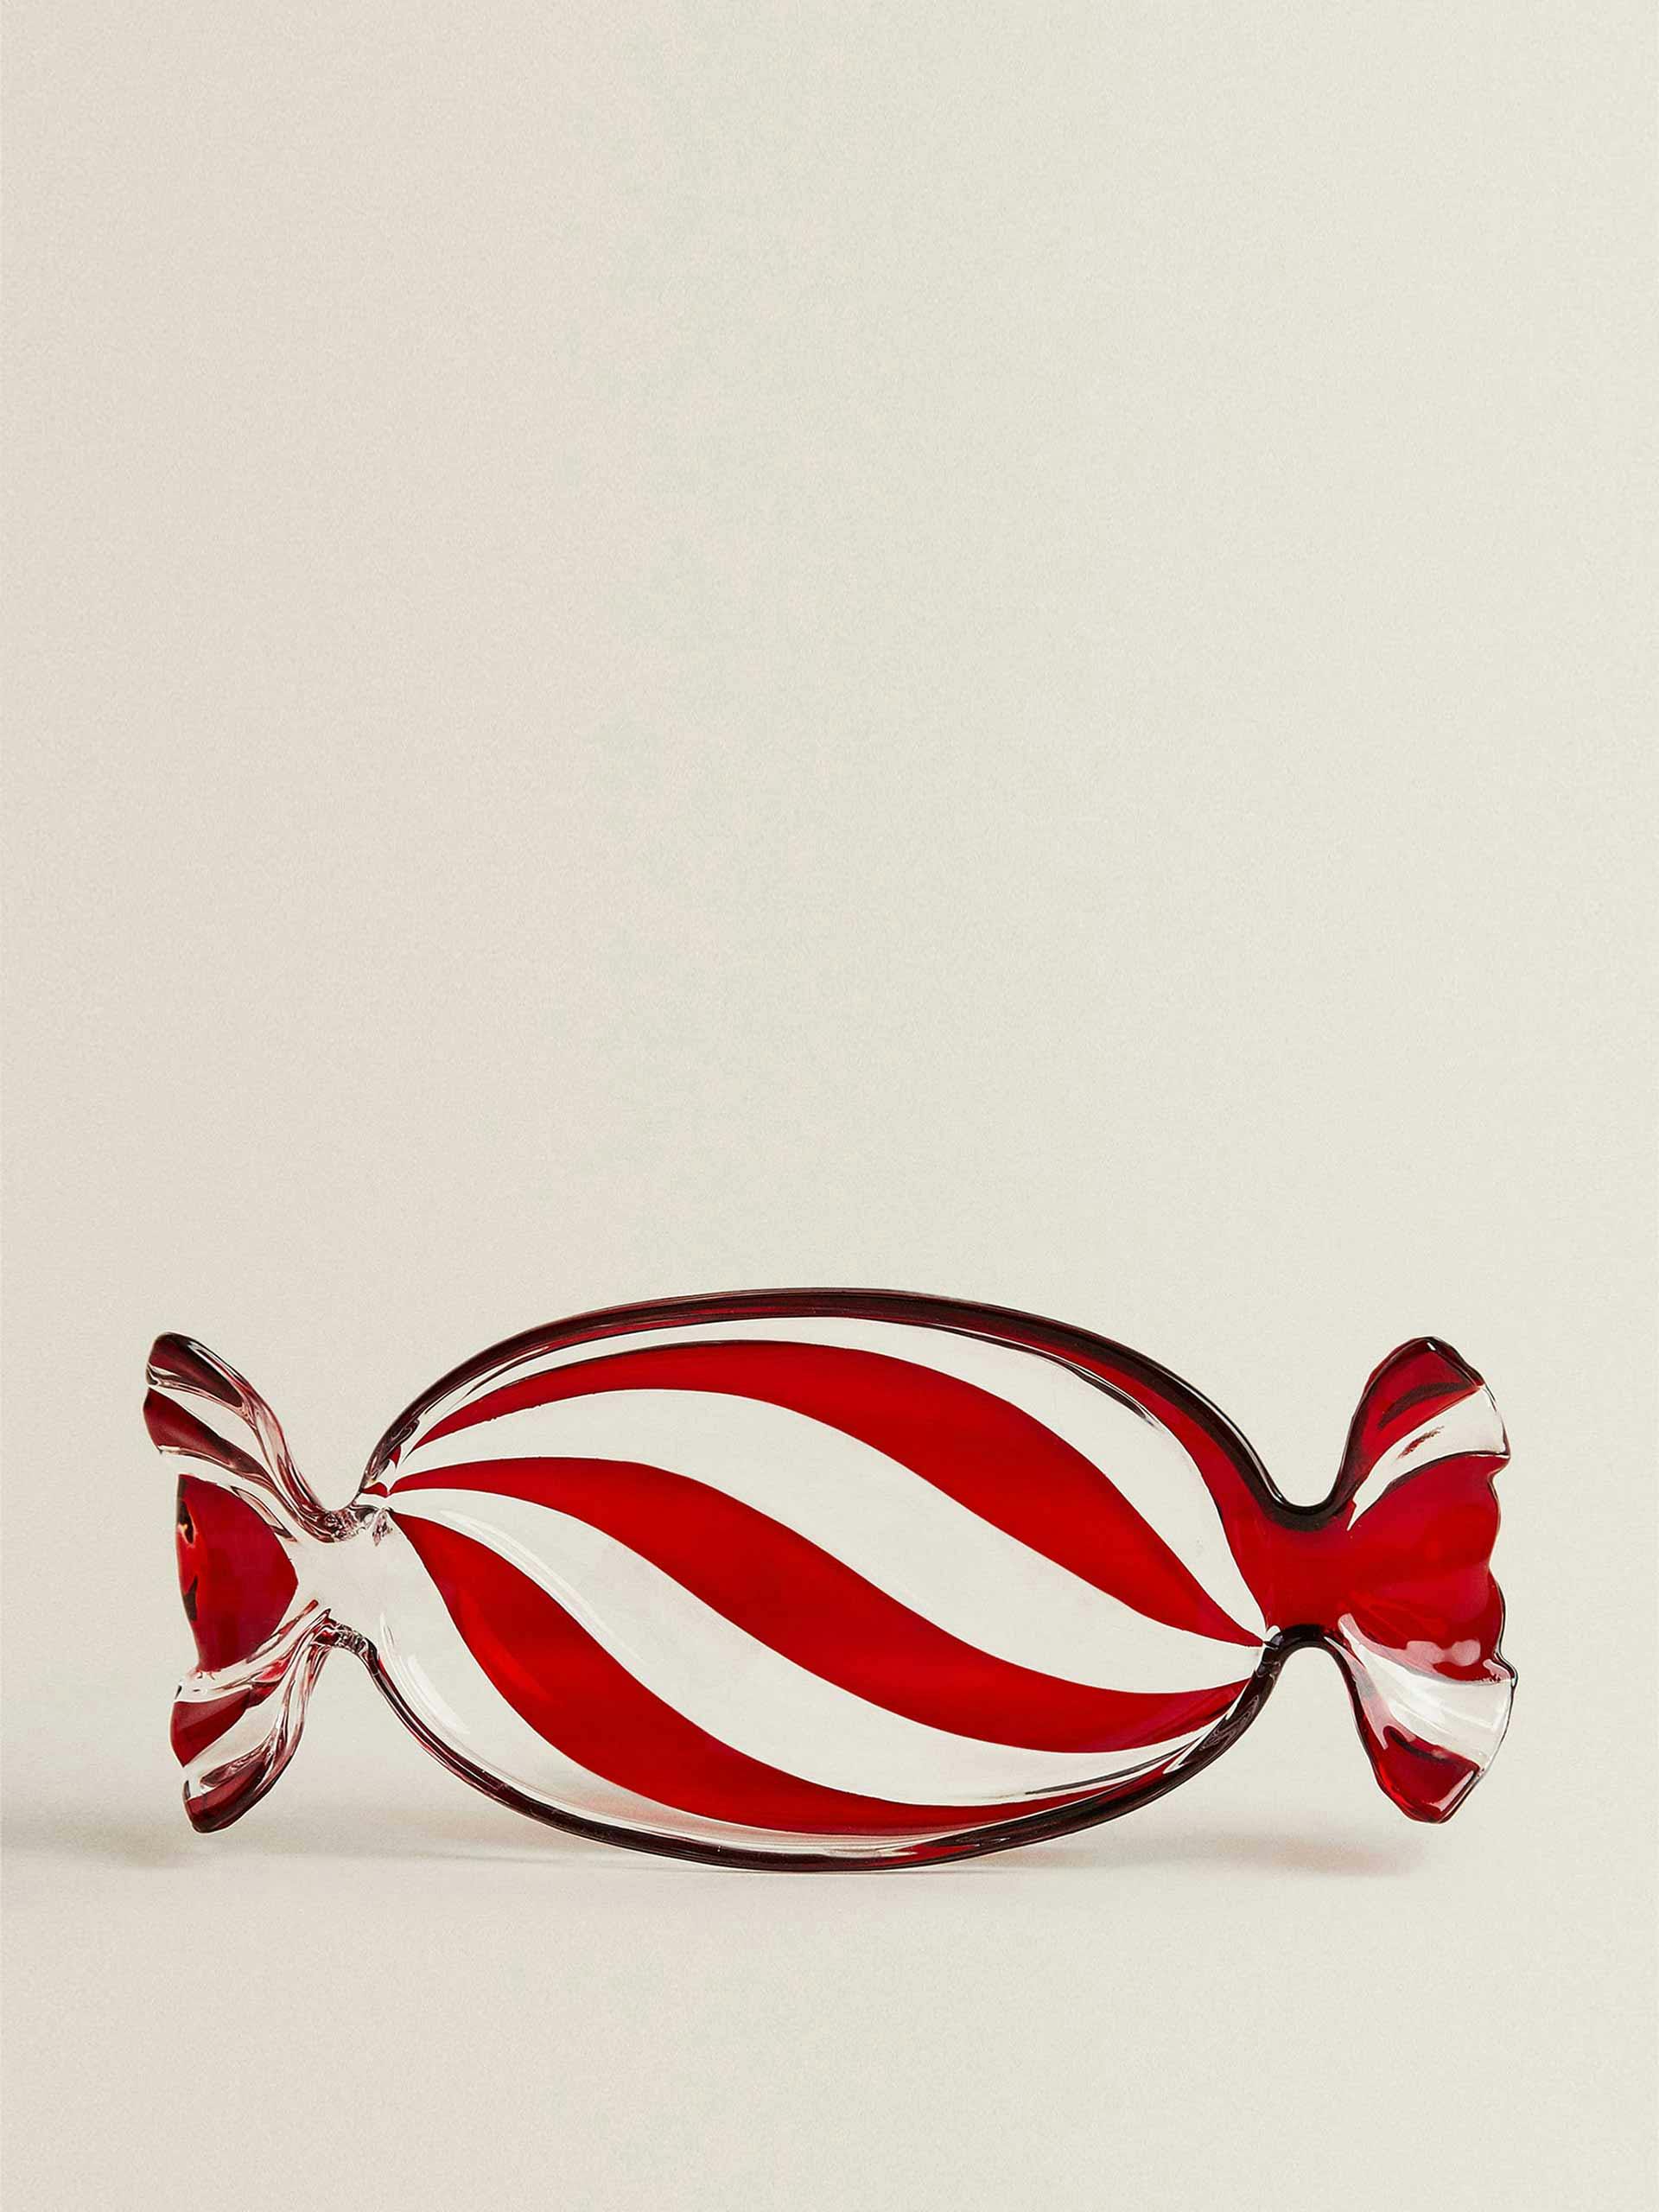 Sweet-shaped glass serving dish